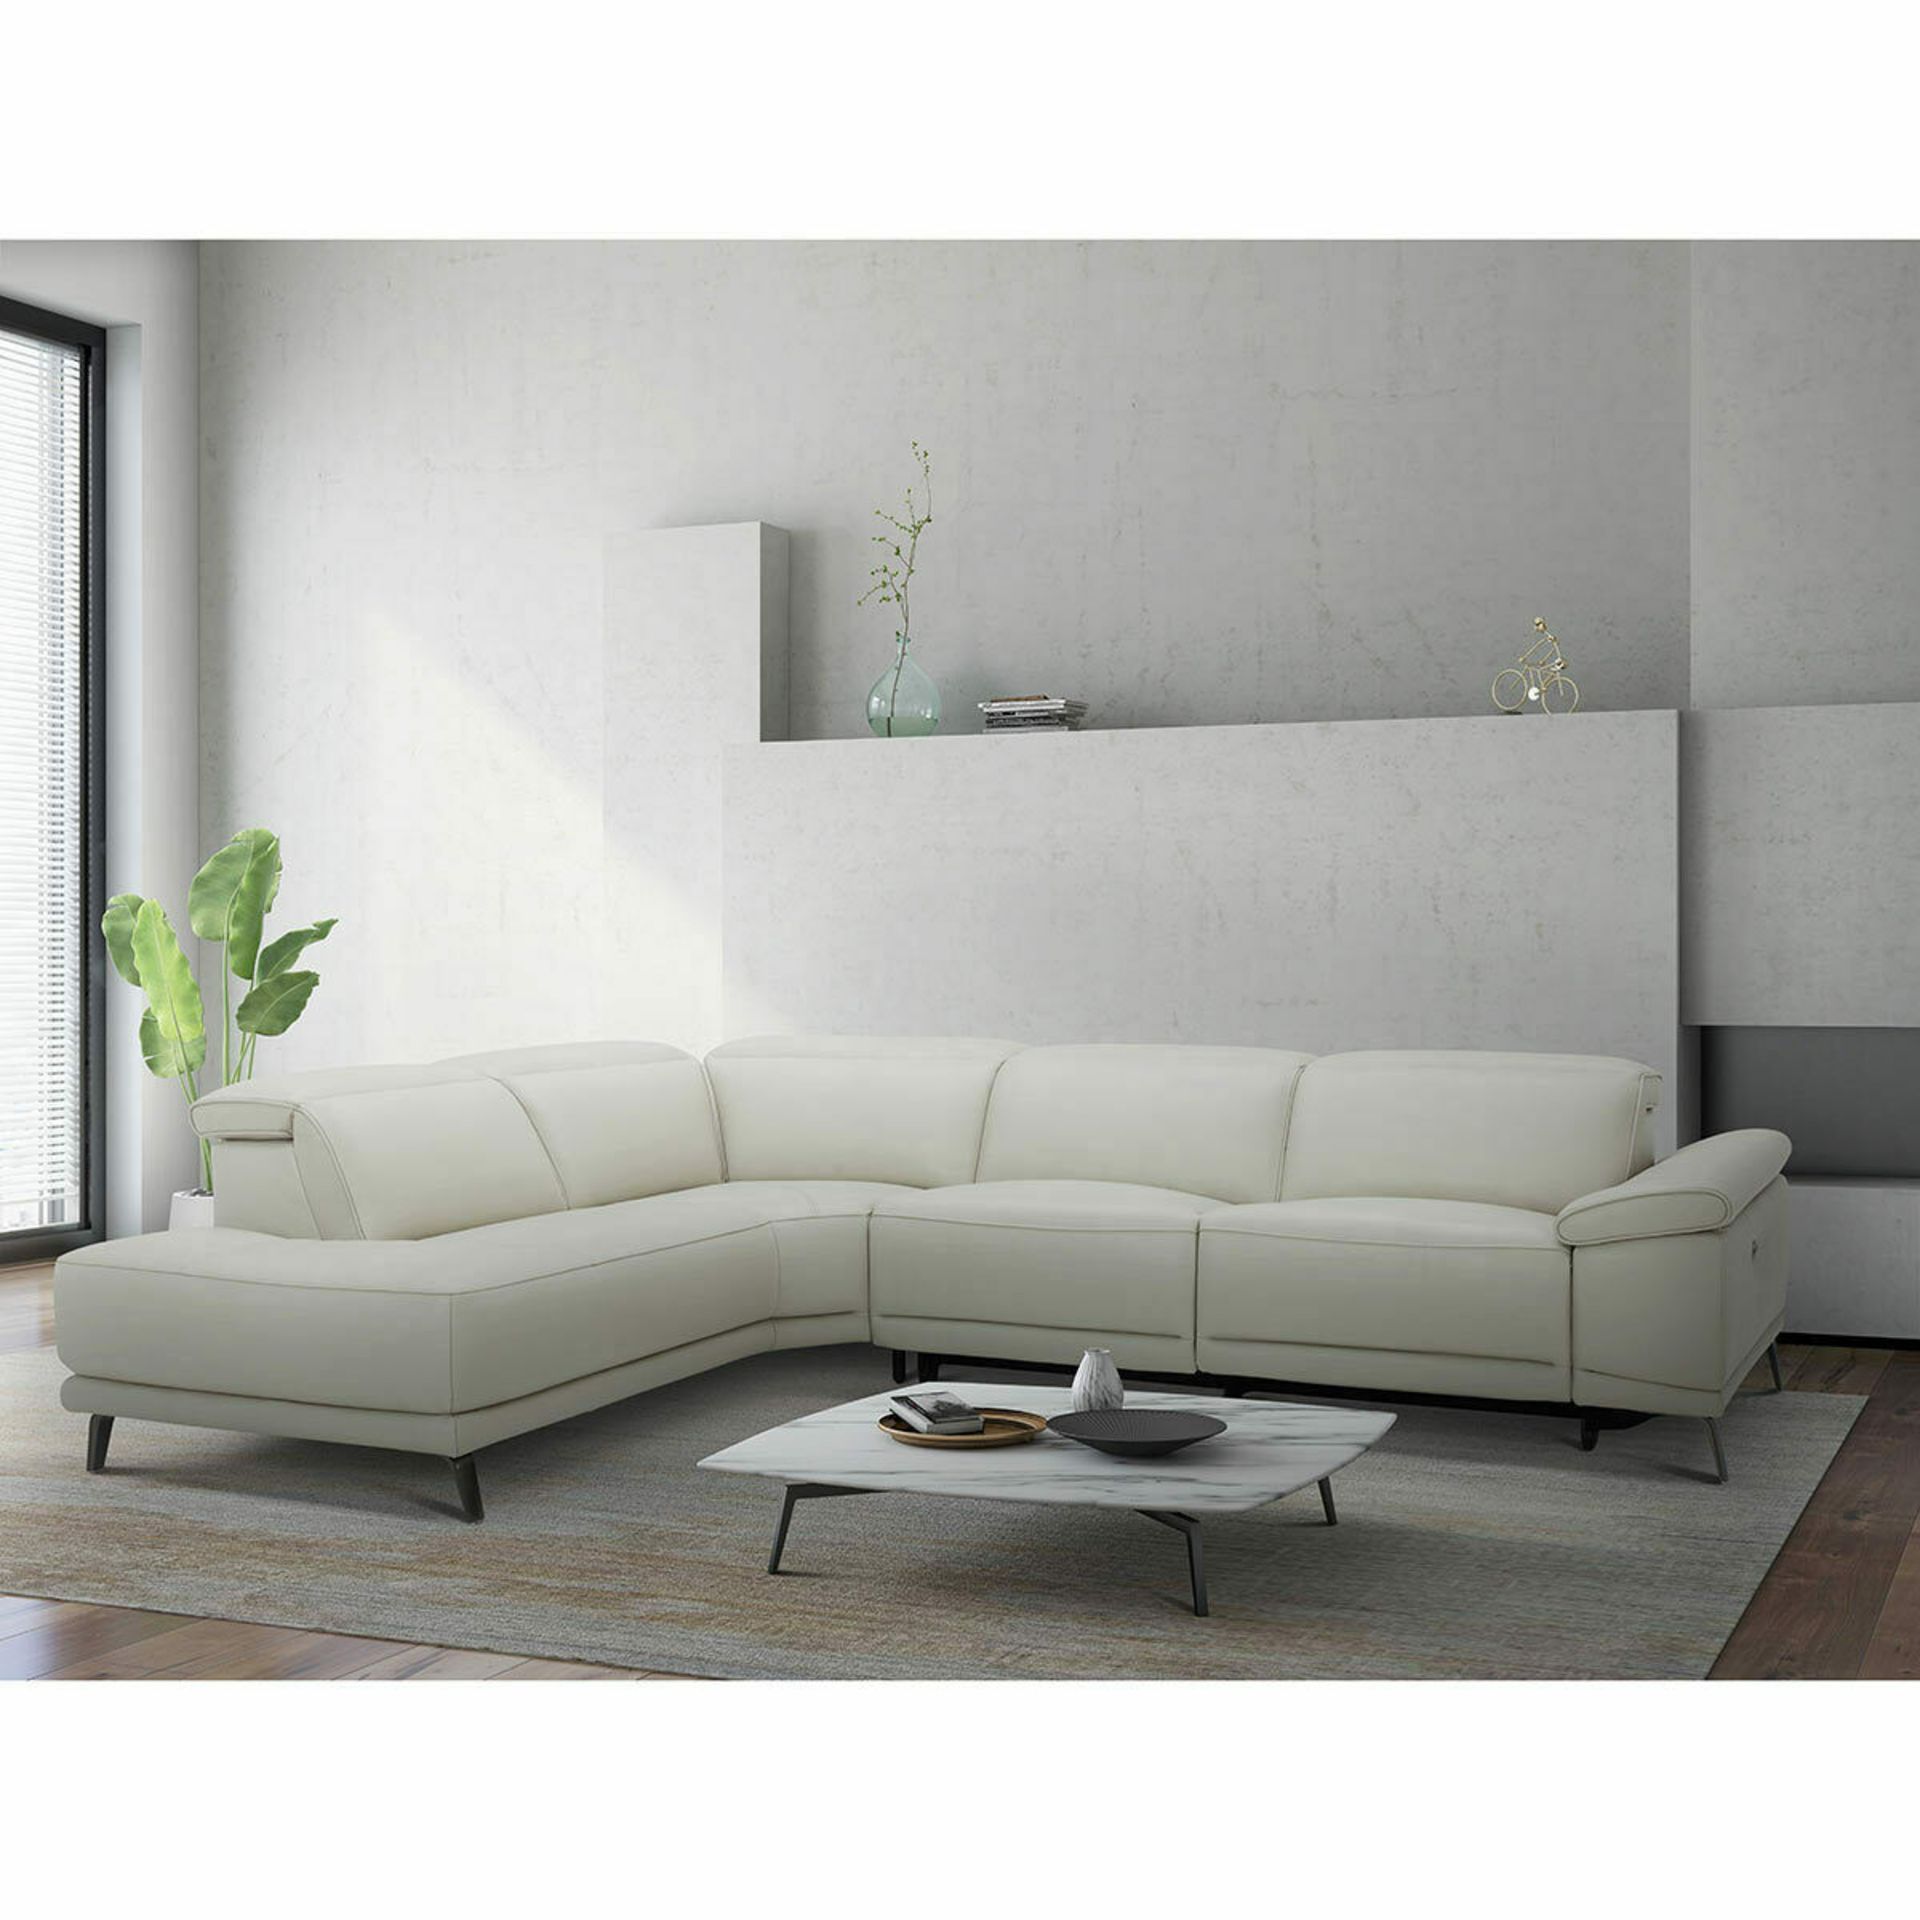 1x Gilman Creek 5 Seater Power Recliner Sofa with USB Charging Points - Cream Leather - Tested